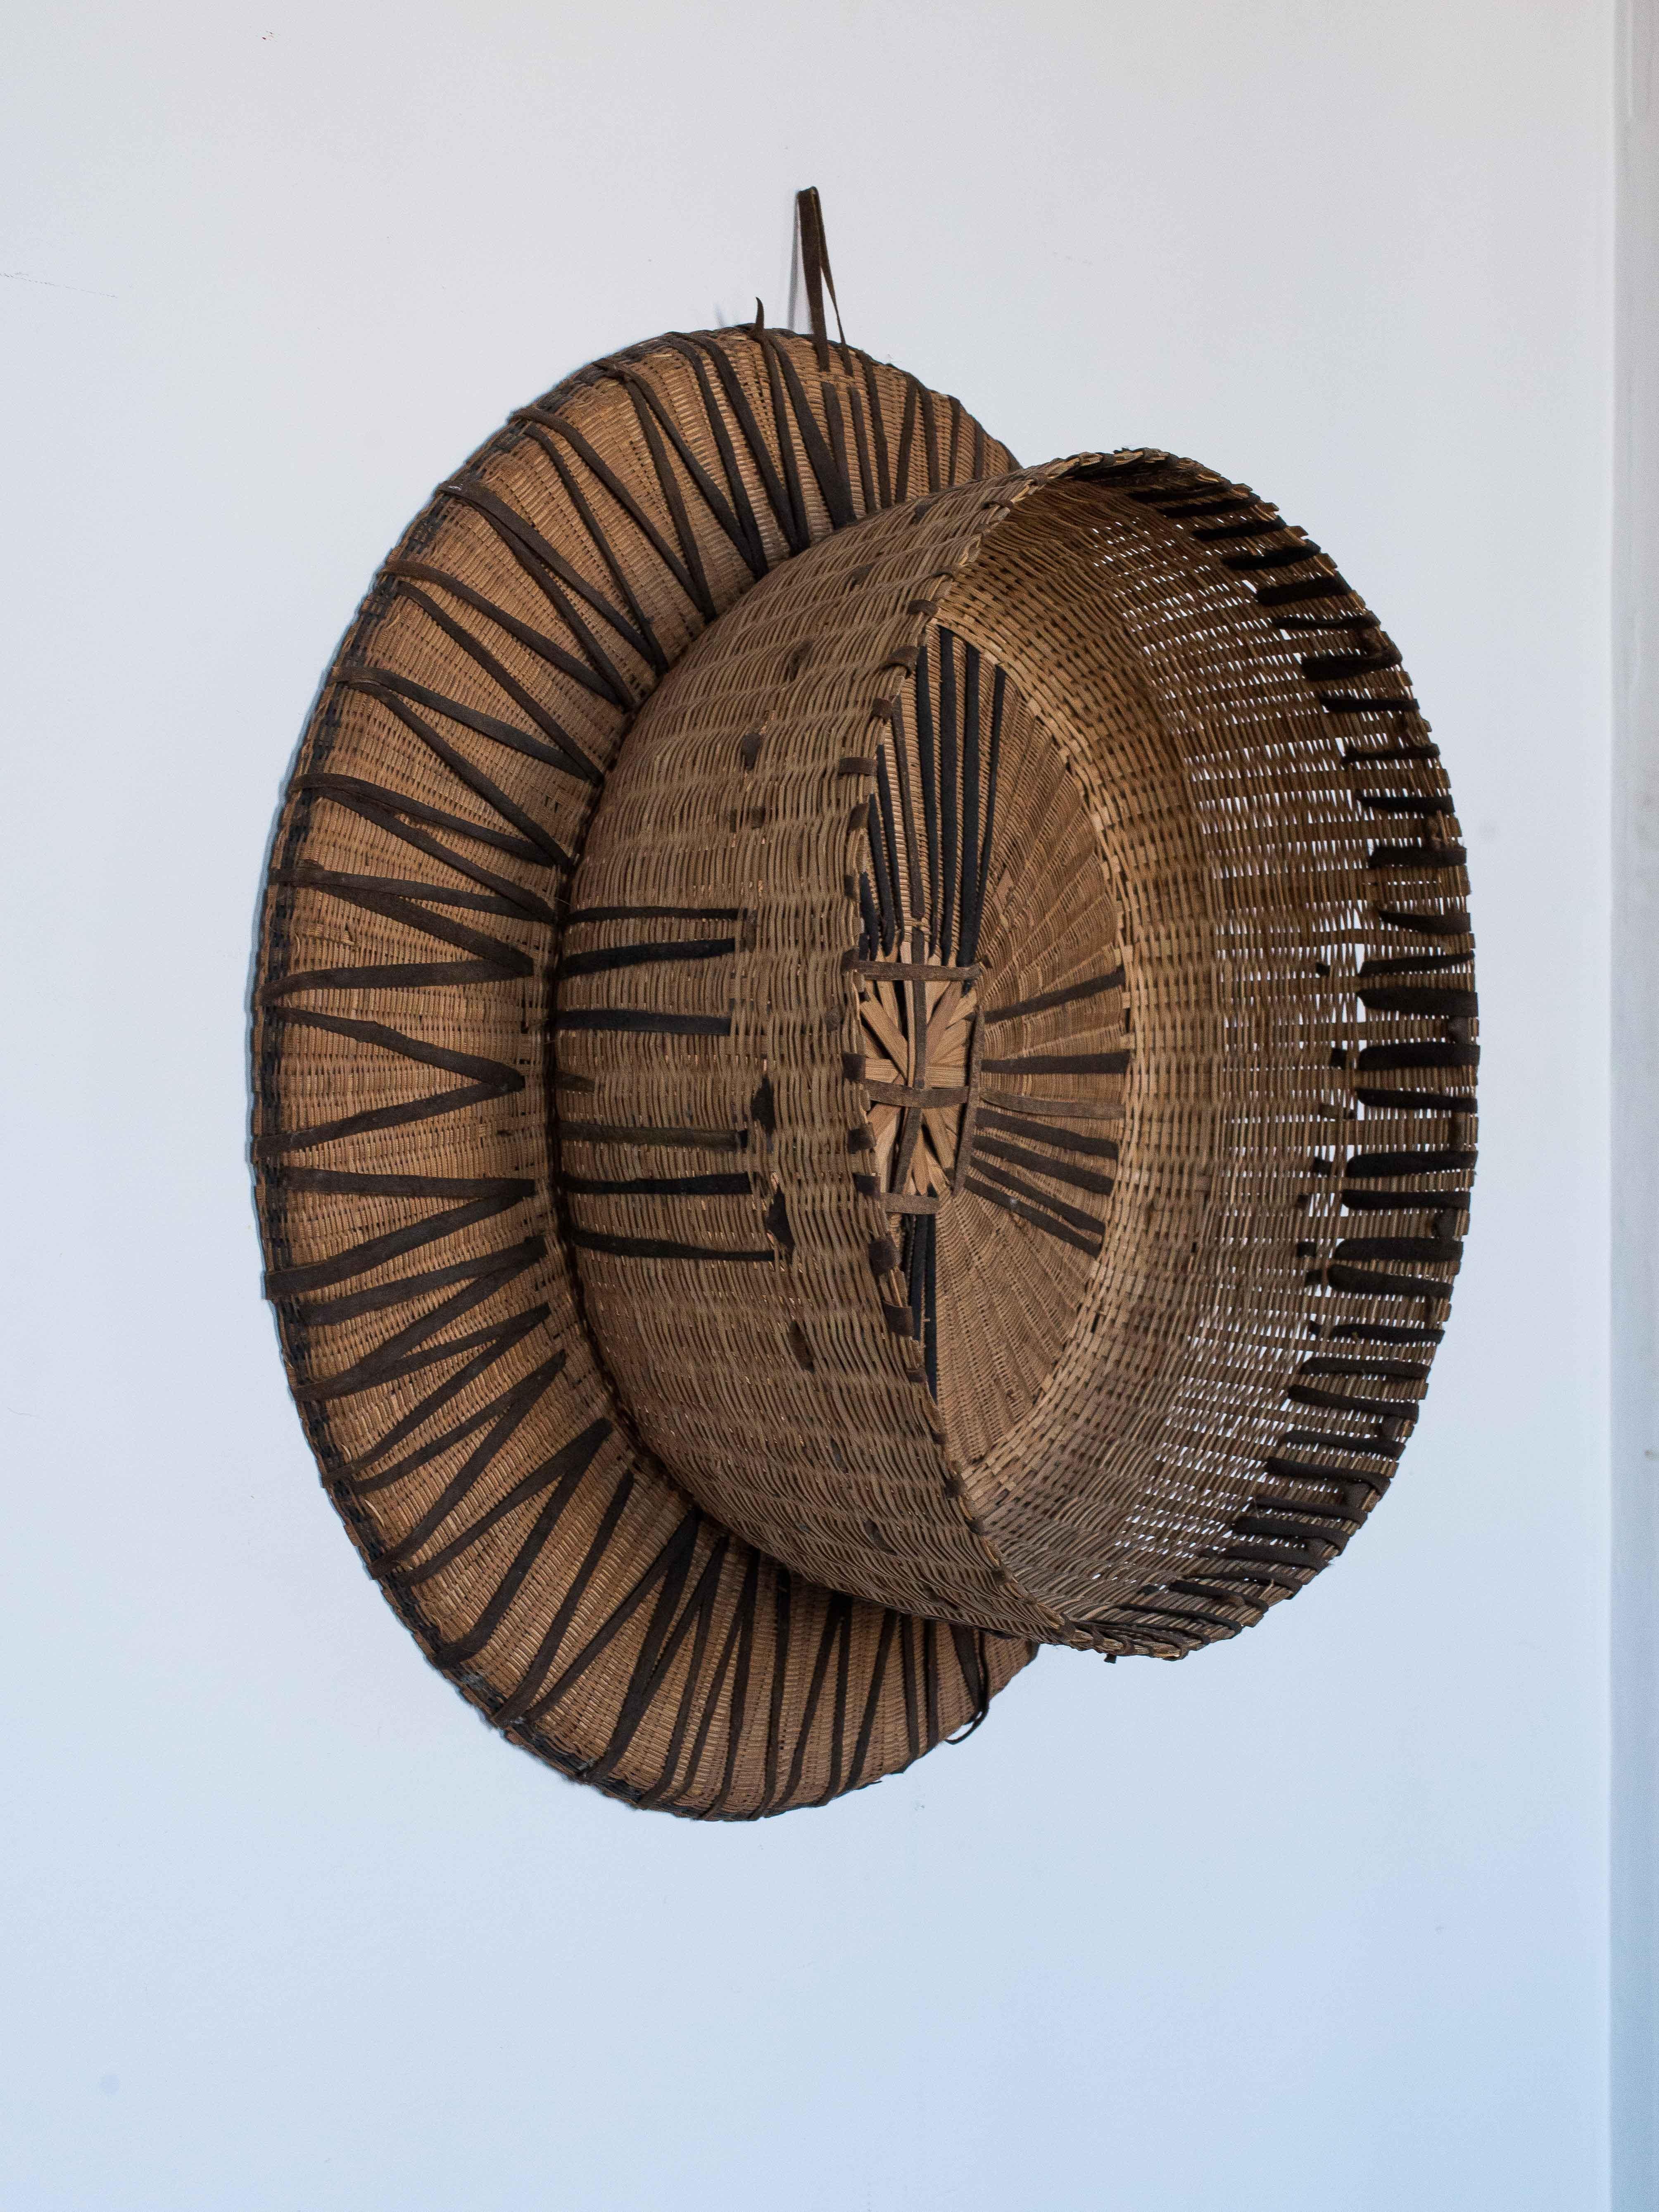 Very Large Wall Basket, Straw and Leather, African Folk Art 1970 For Sale 1